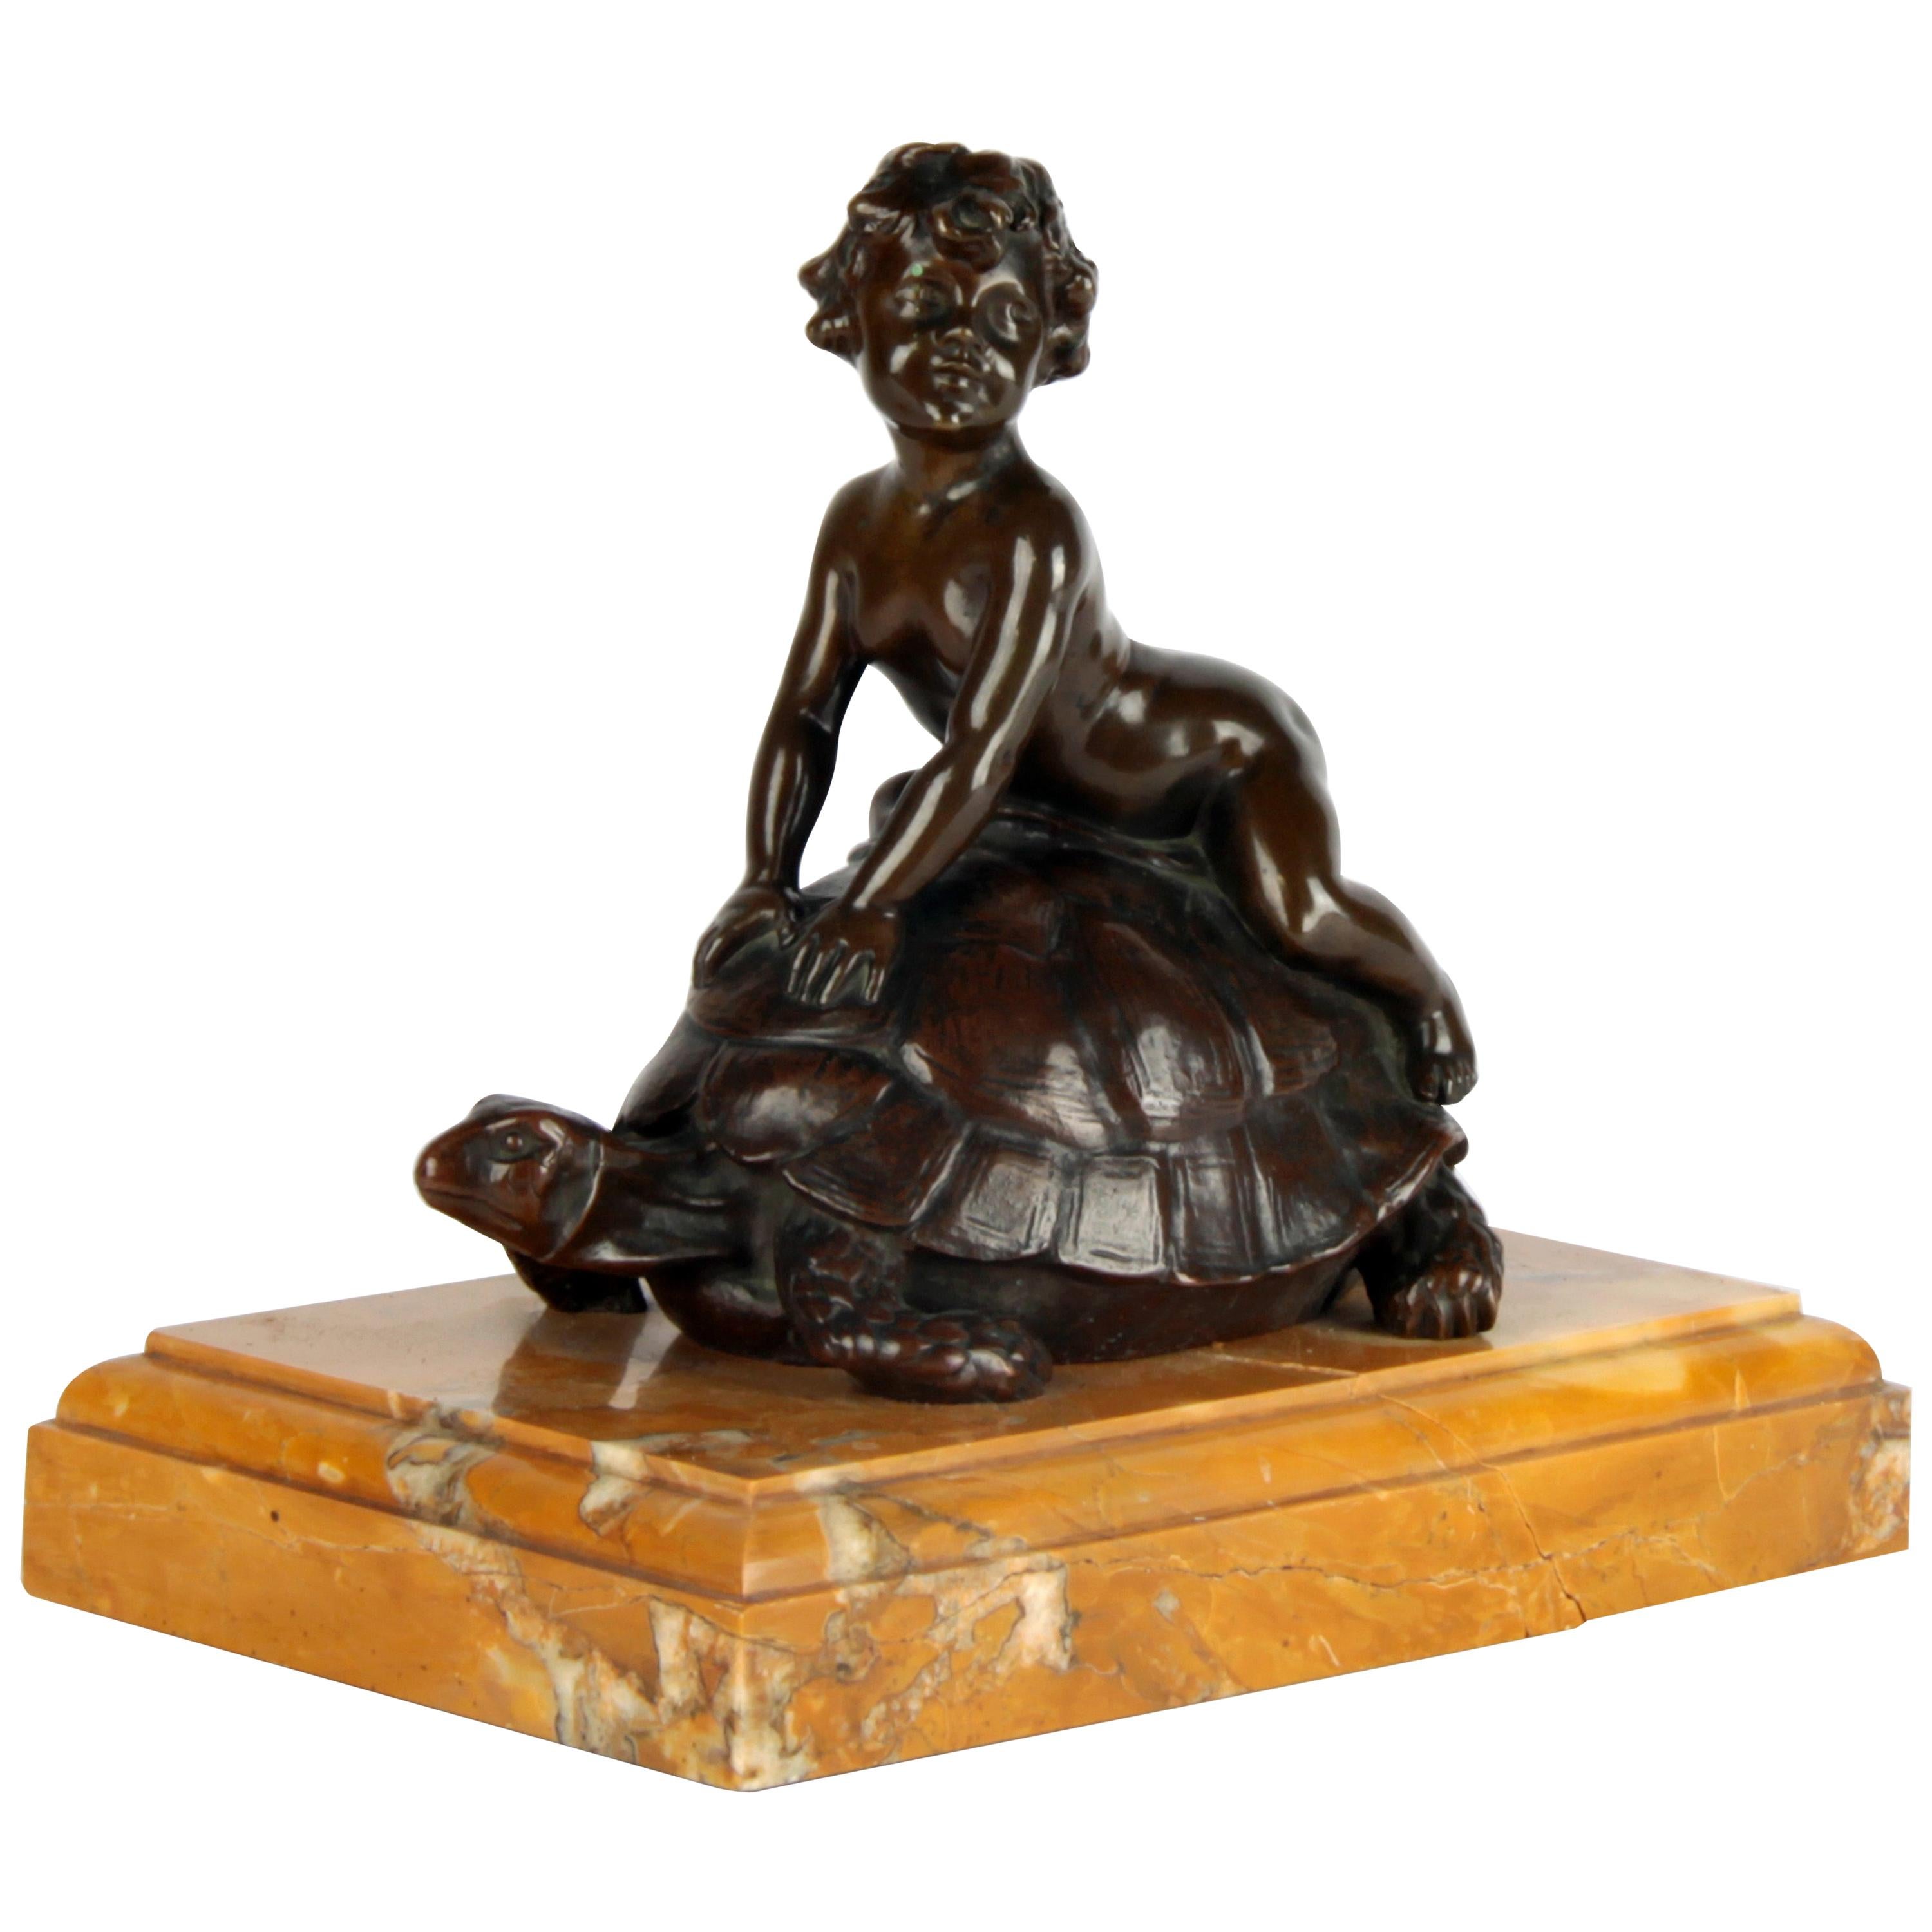 Fine Italian Bronze of a Putto Sitting on a Turtle, Signed by Luca Madrassi